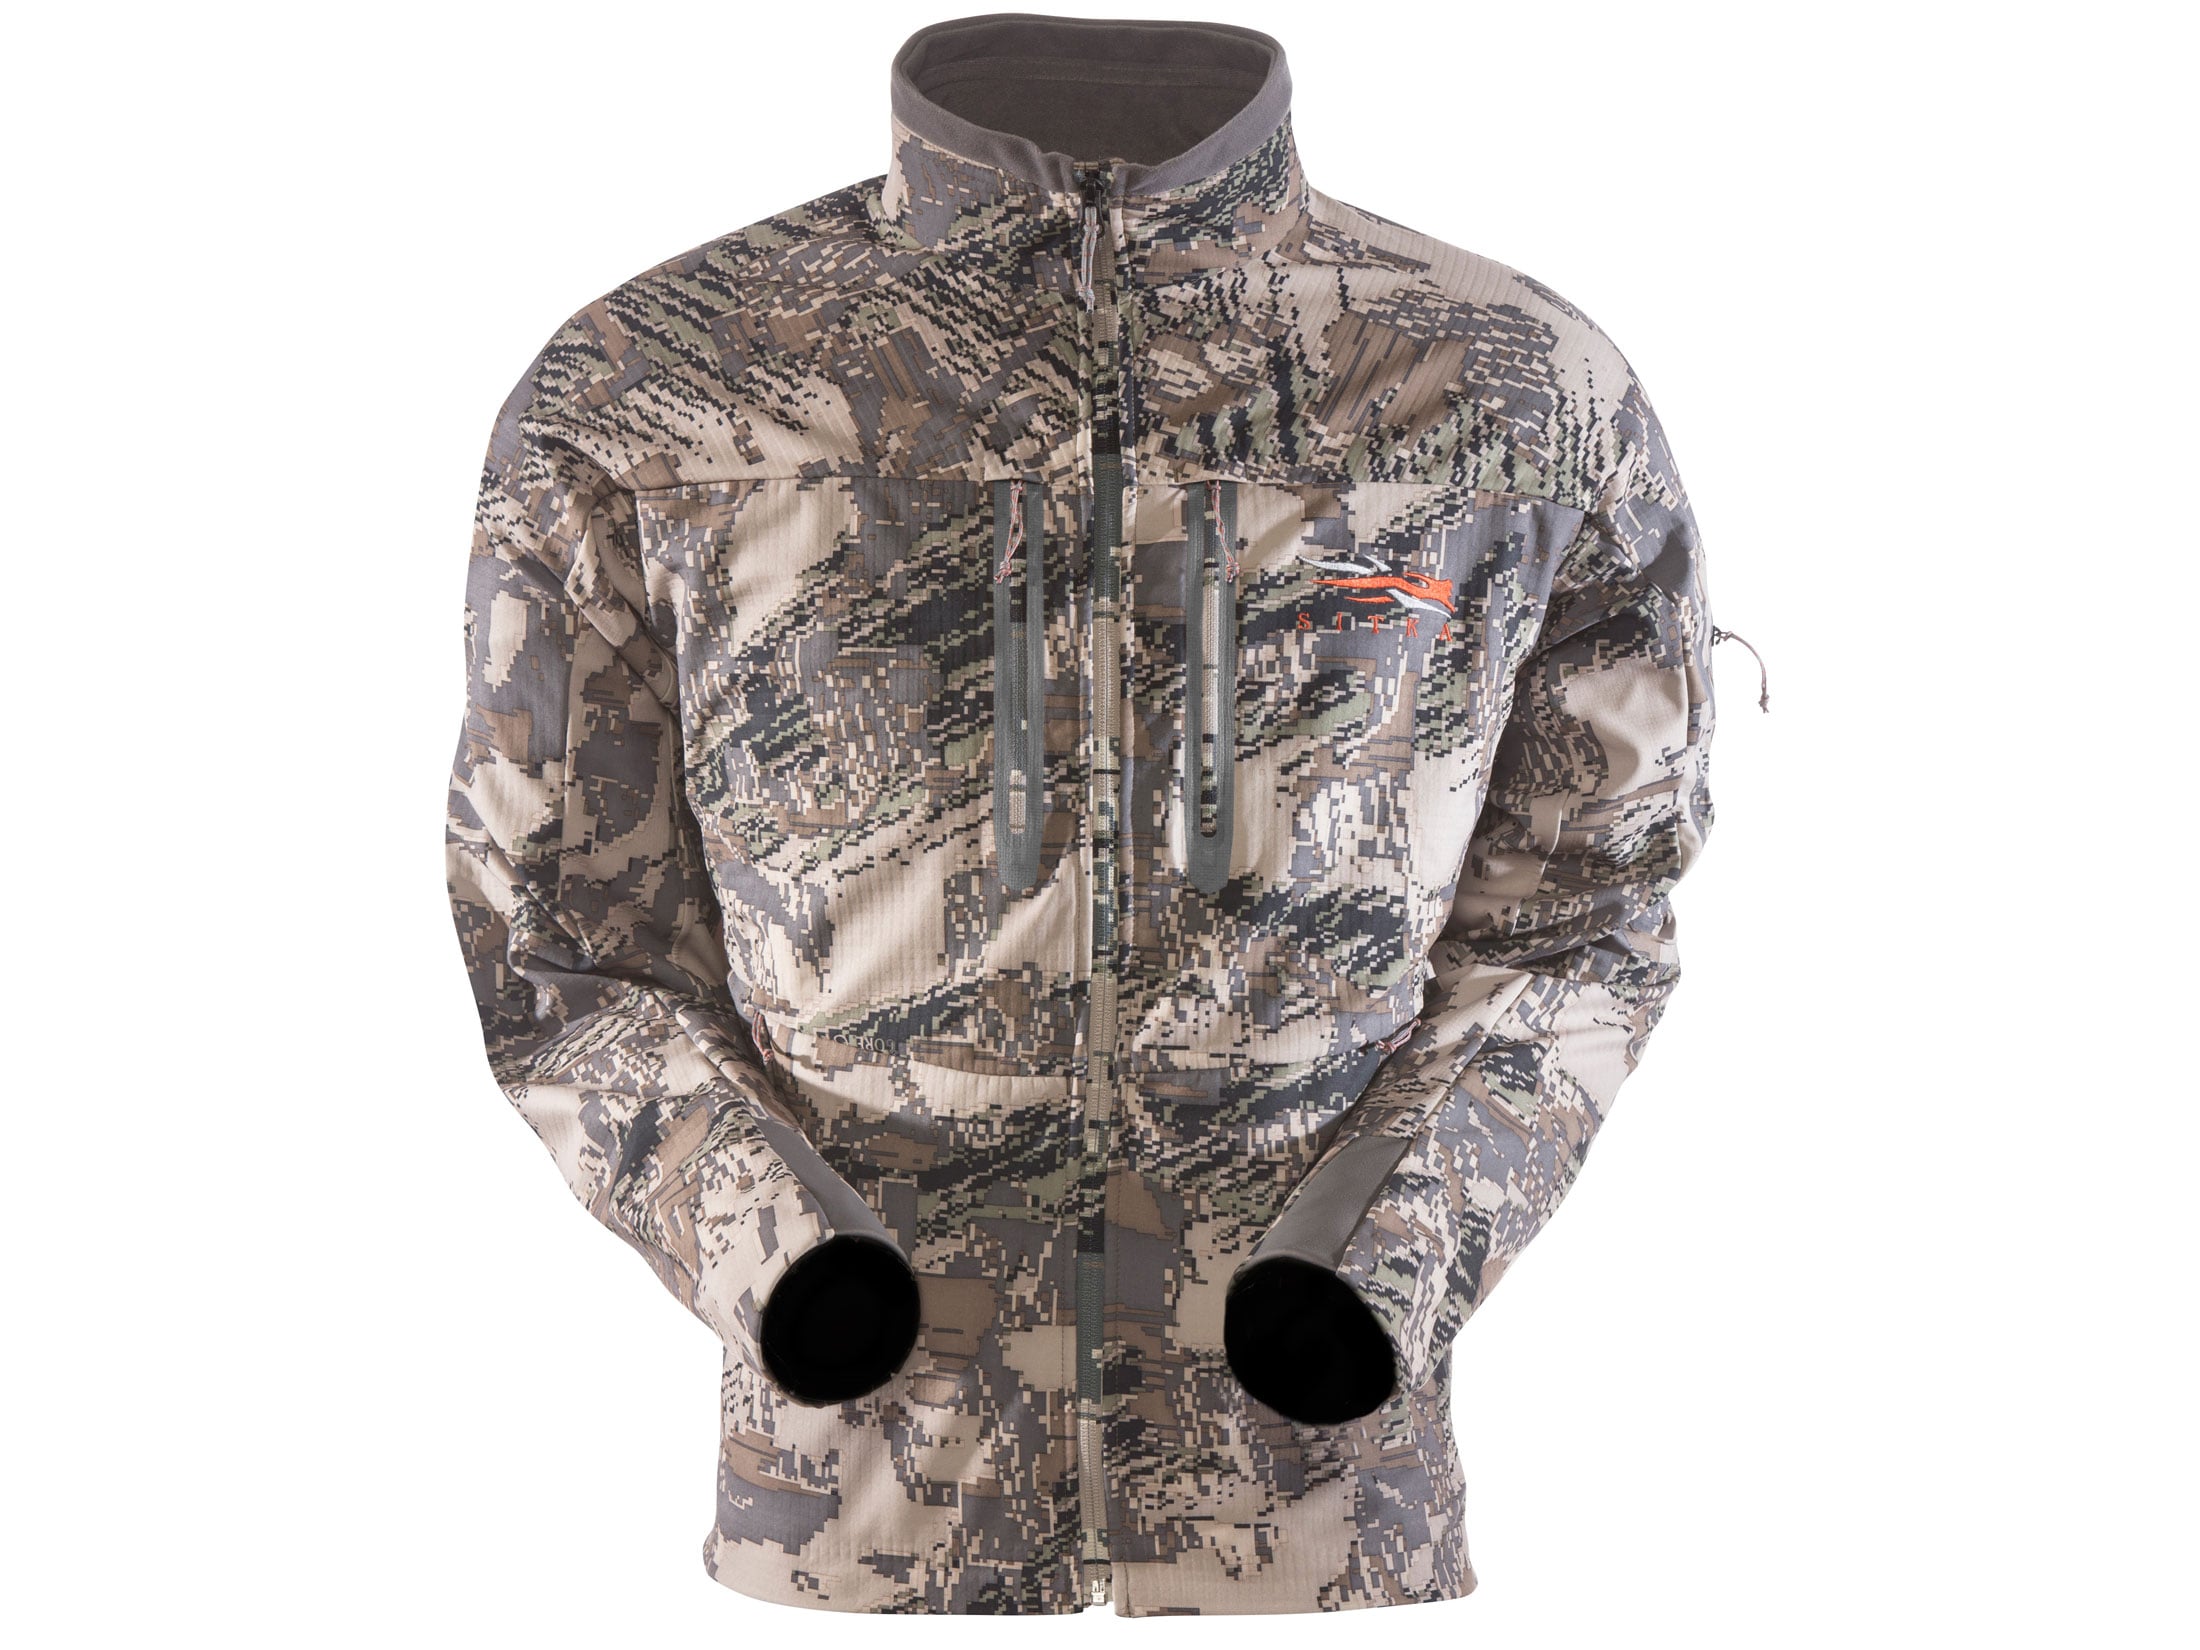 Sitka Gear Men's 90% Jacket Polyester Gore Optifade Open Country Camo.